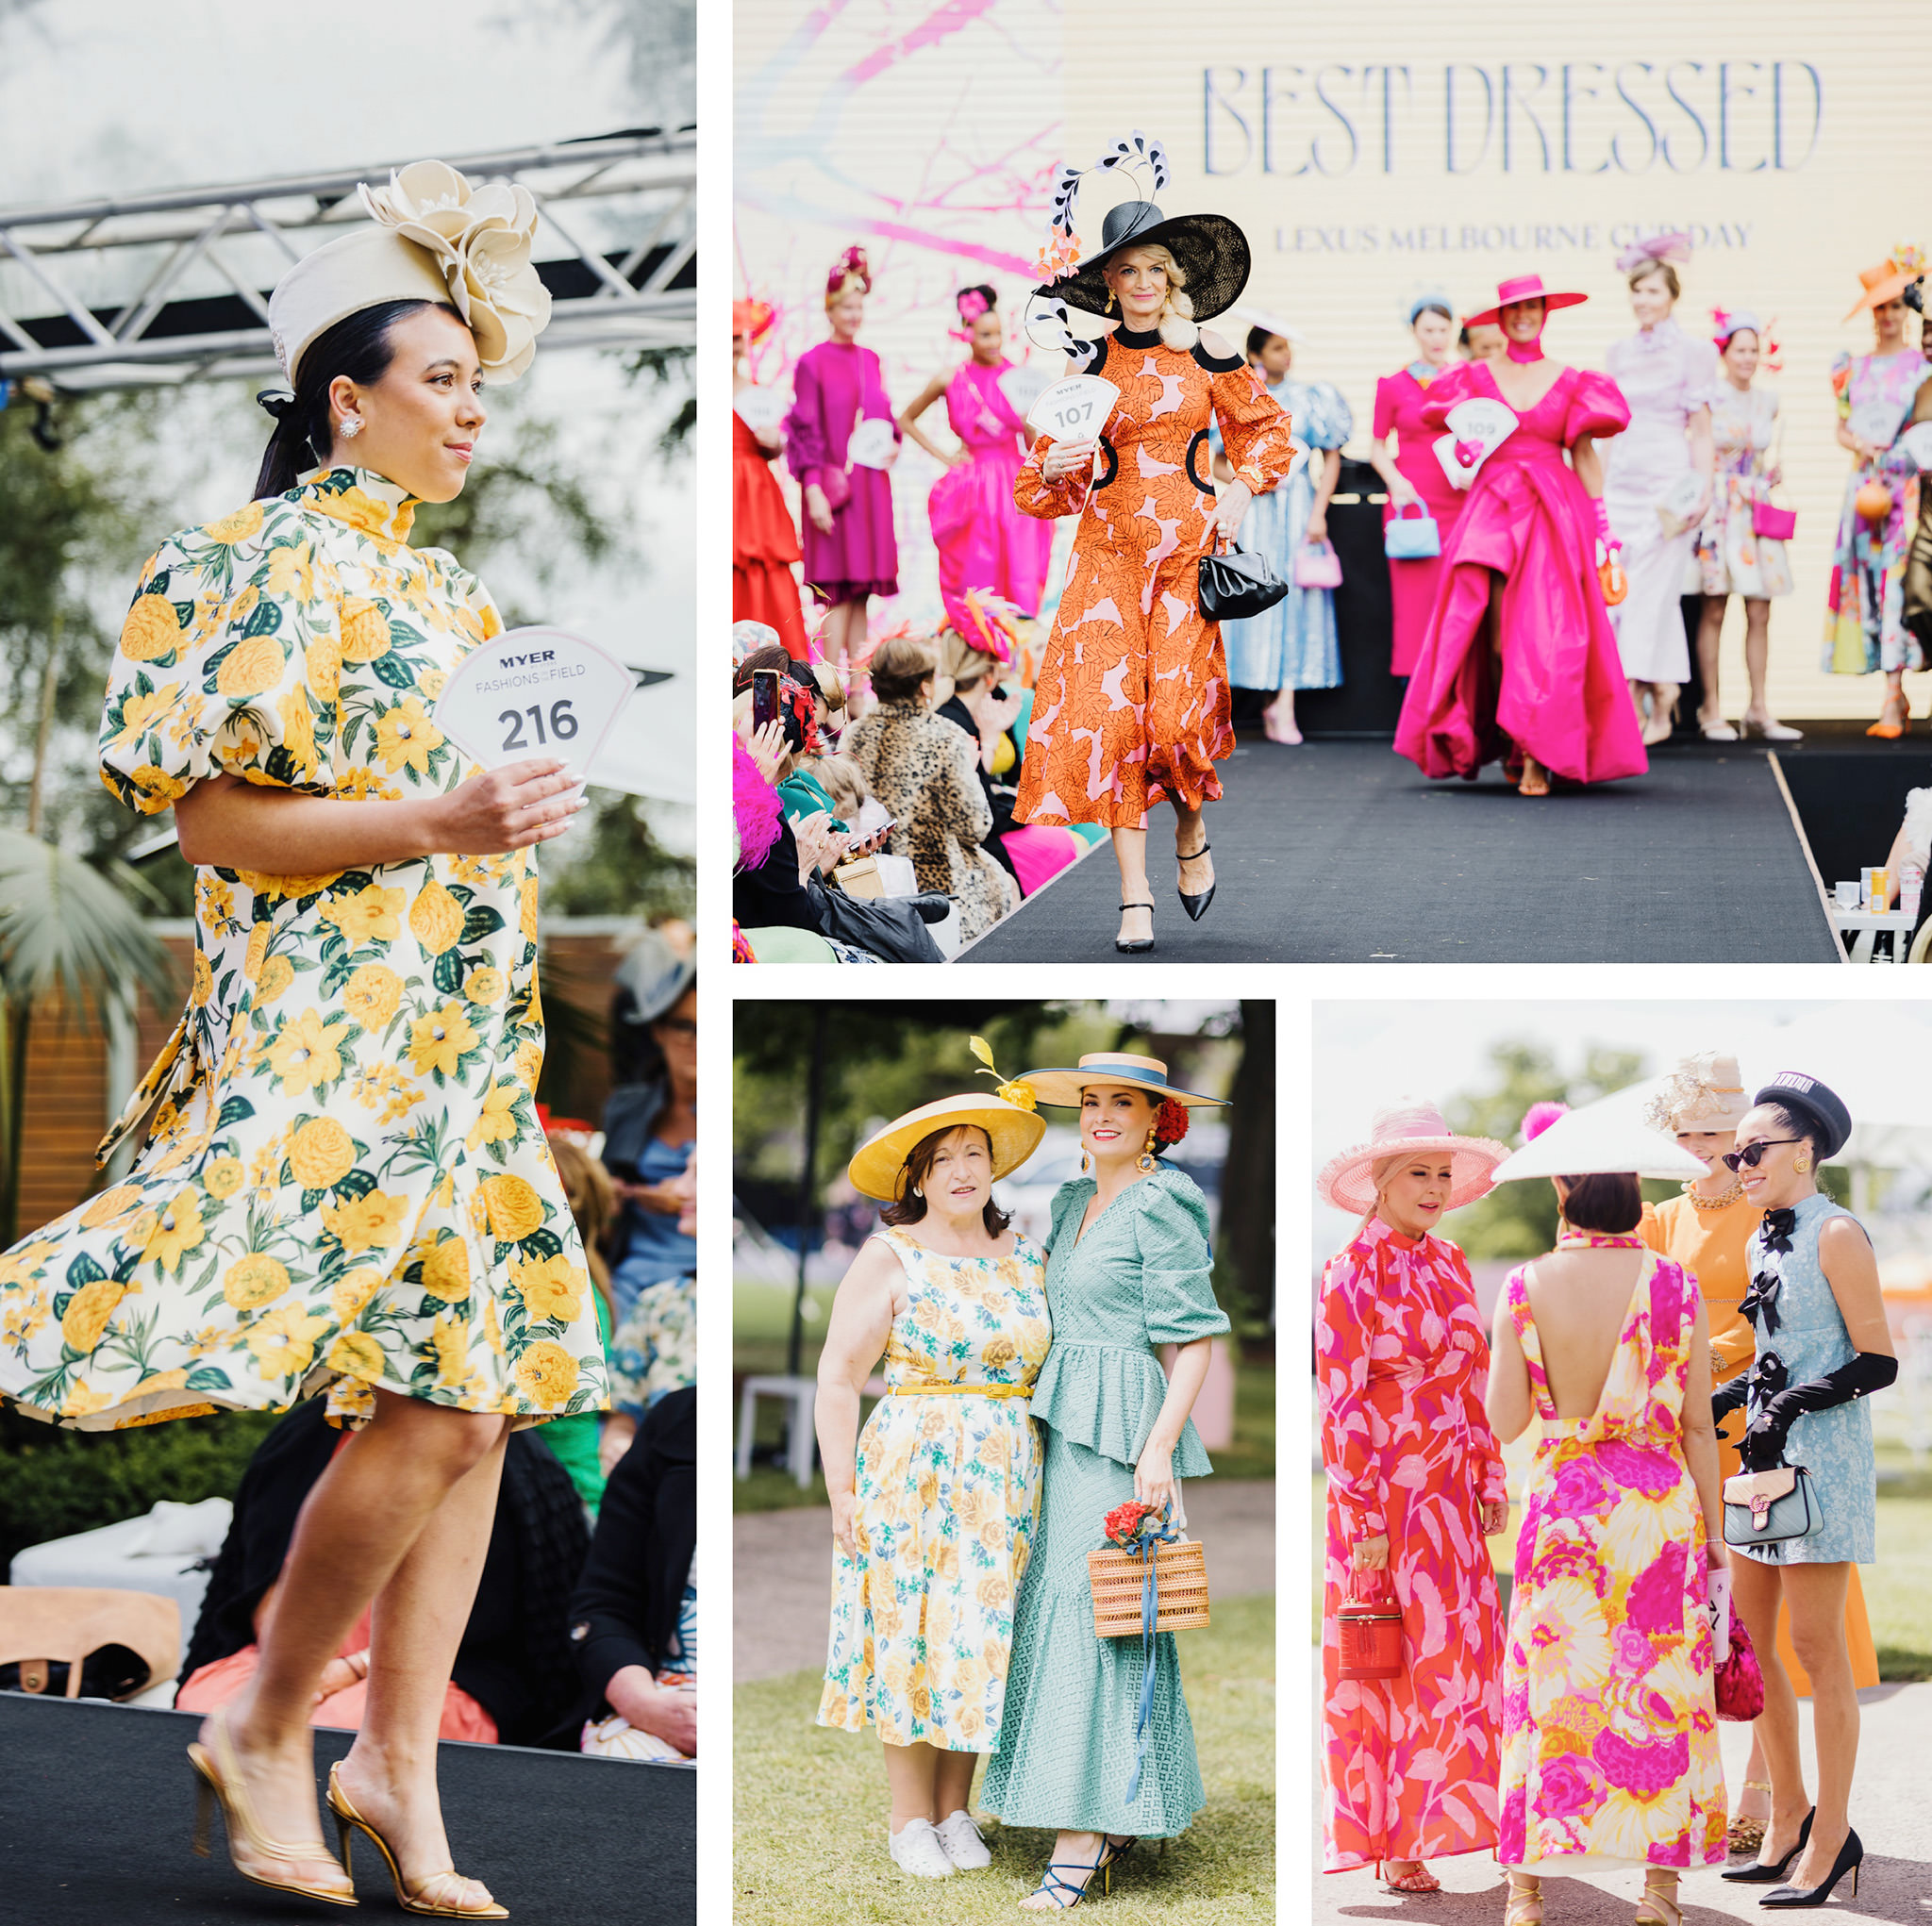 Fashion 2022 at the races in Melbourne